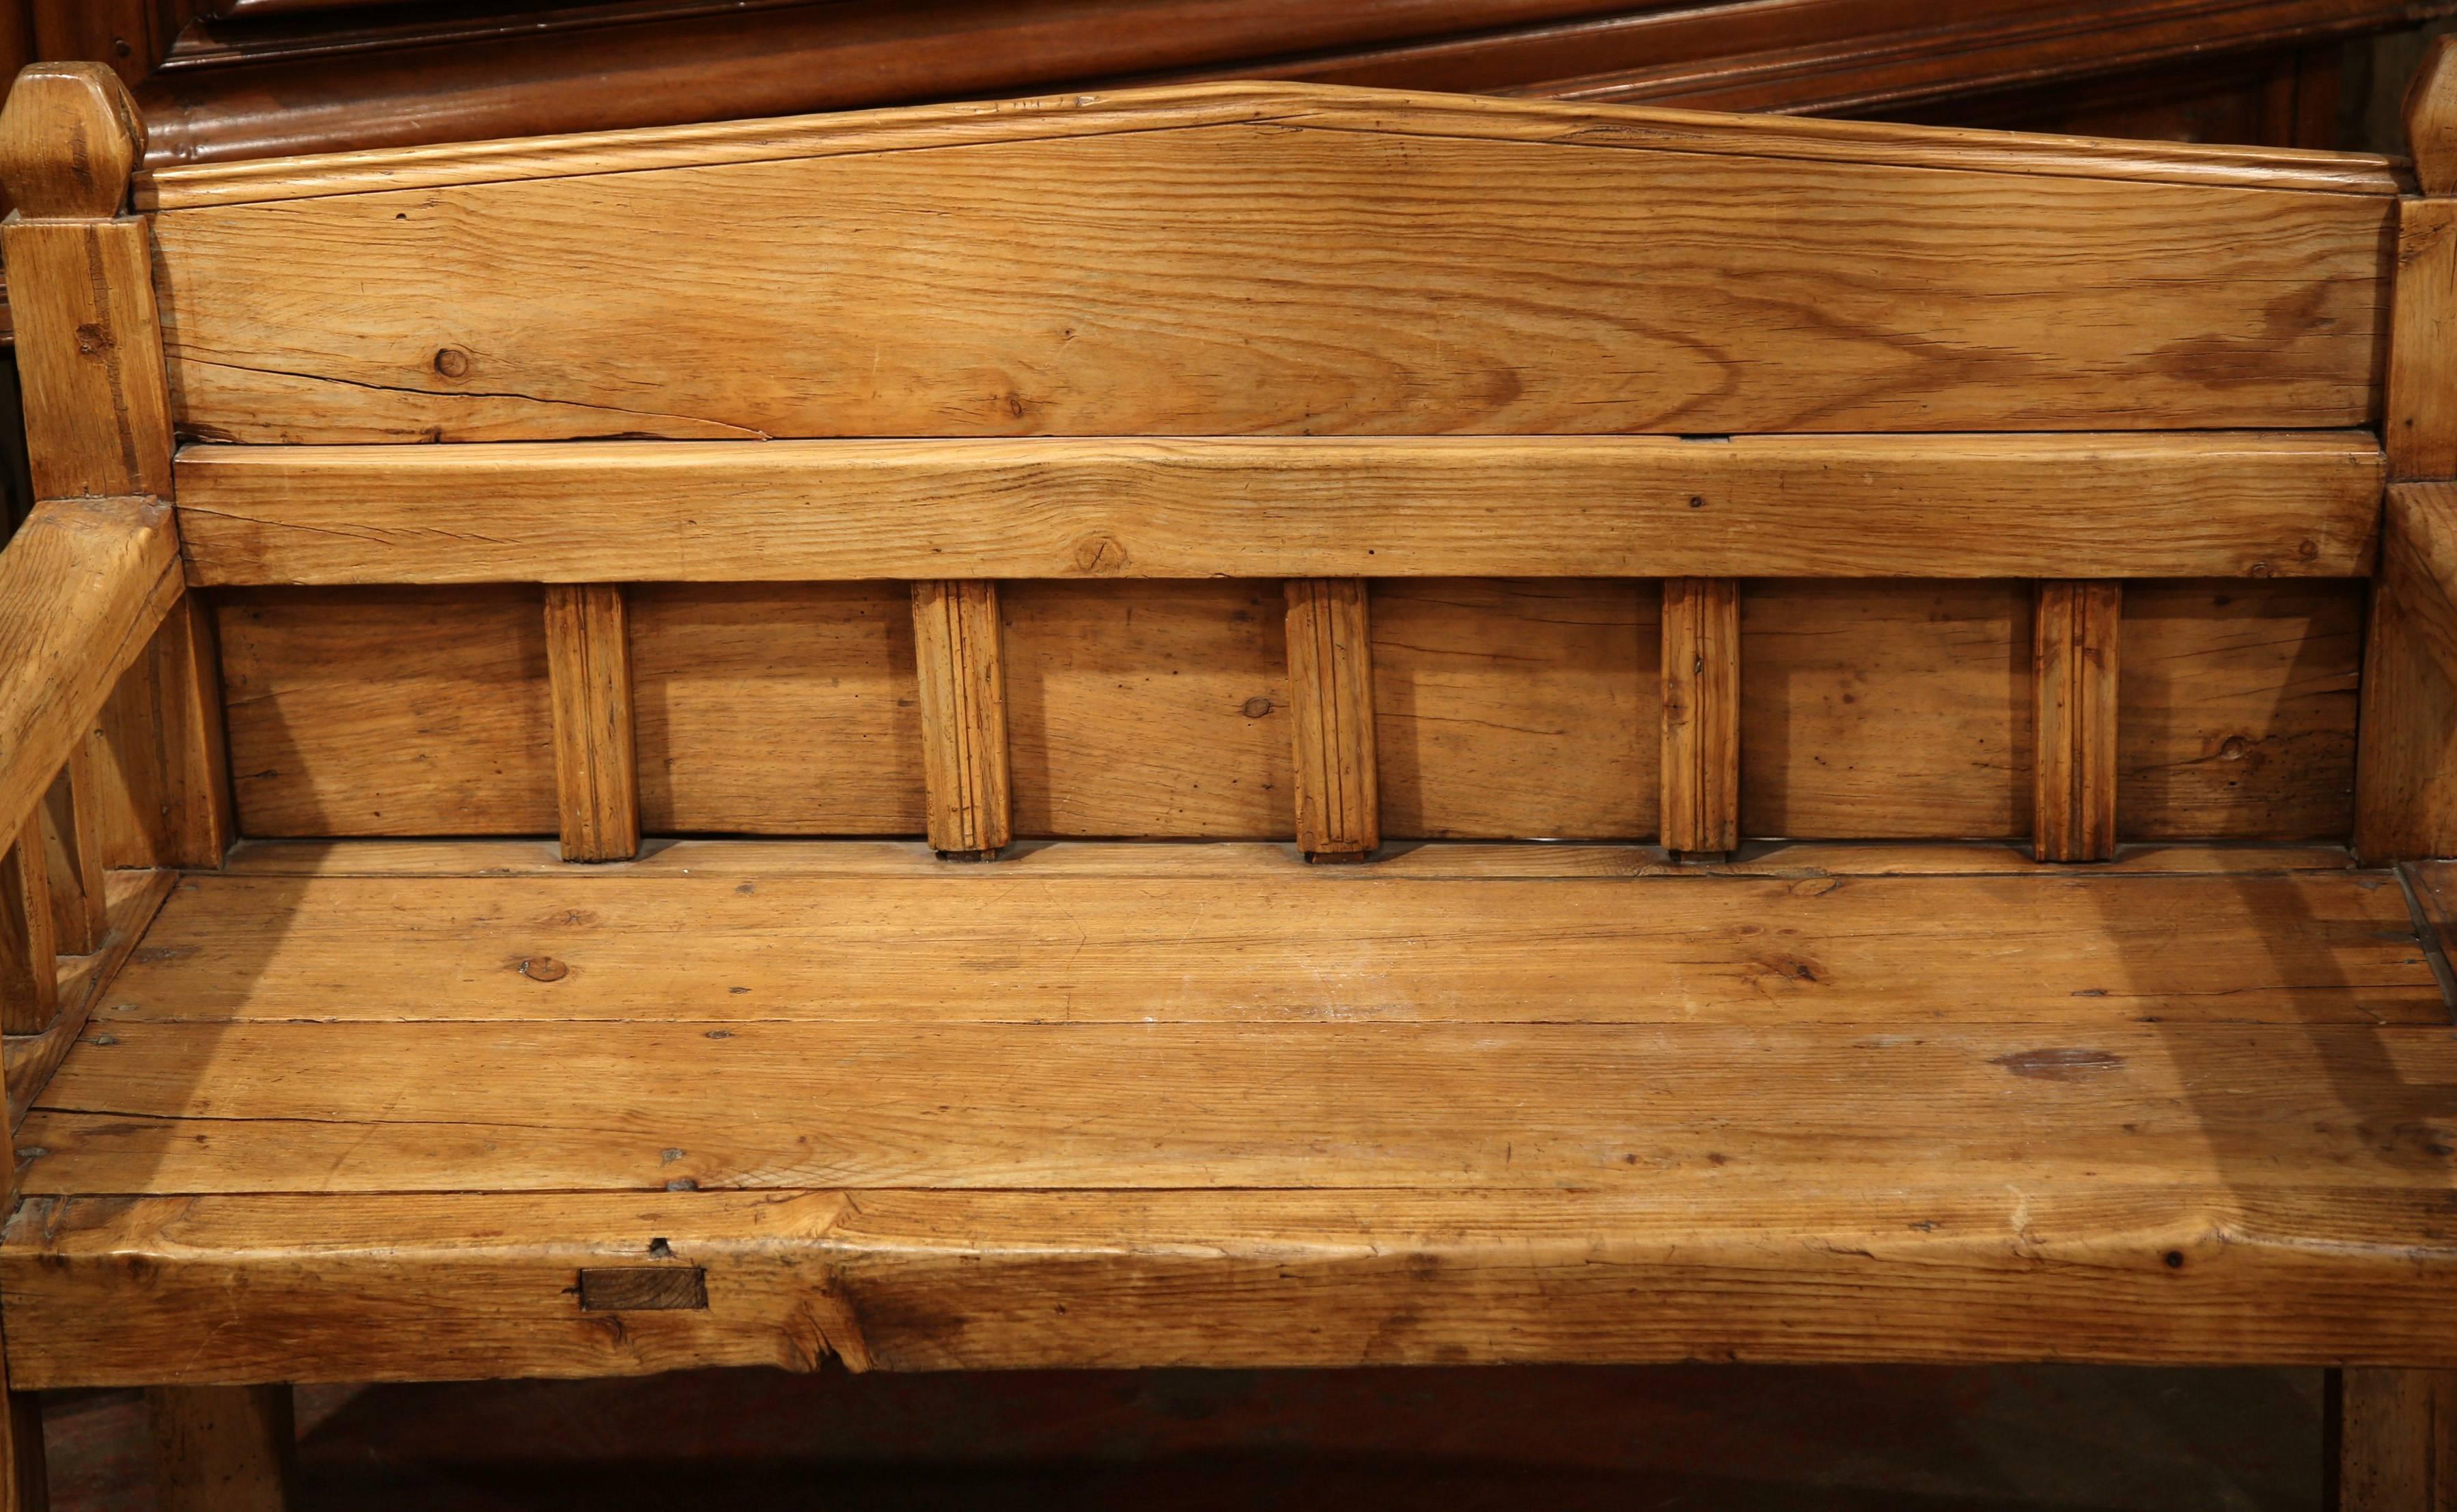 Rustic 19th Century Country French Carved Pine Bench with Back from the Pyrenees